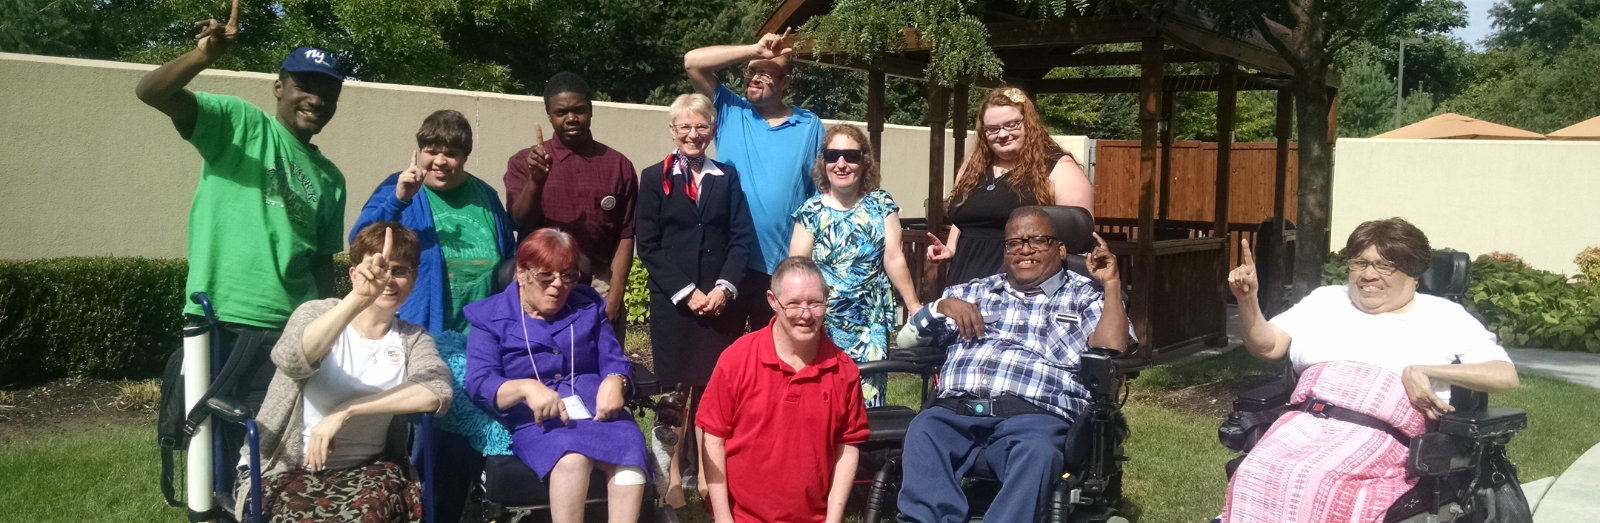 A smiling group of people, some standing, some using wheelchairs, outside on a sunny day. They are holding up one finger to show they are united as one.